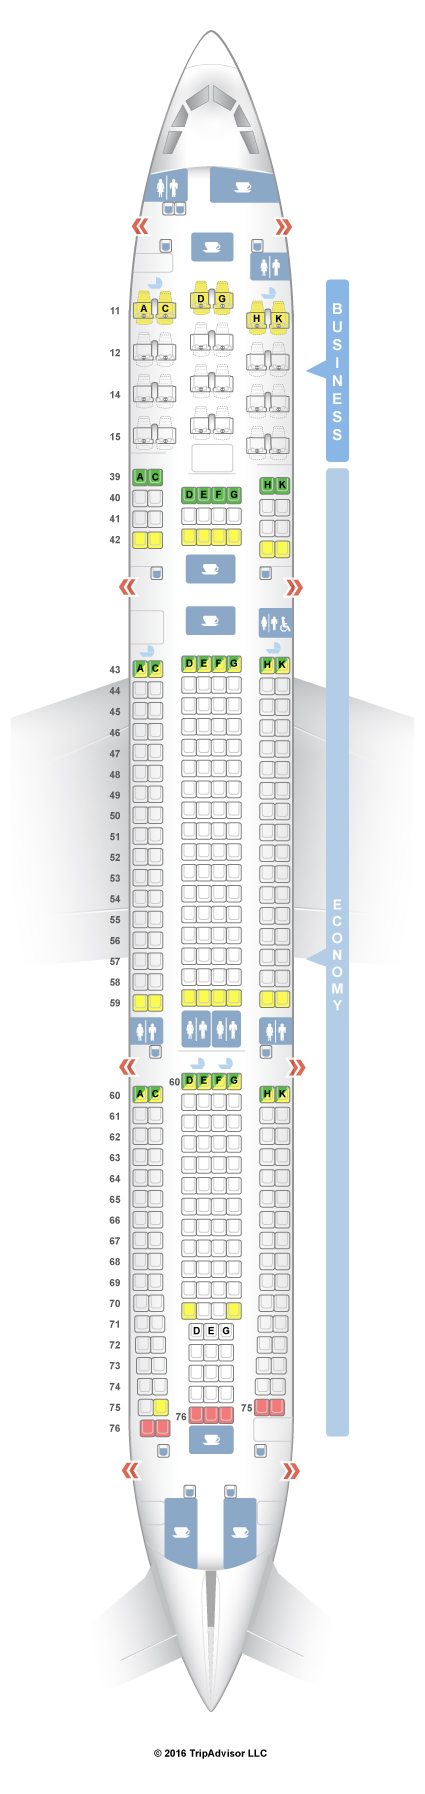 Cathay Pacific Flight Seating Chart